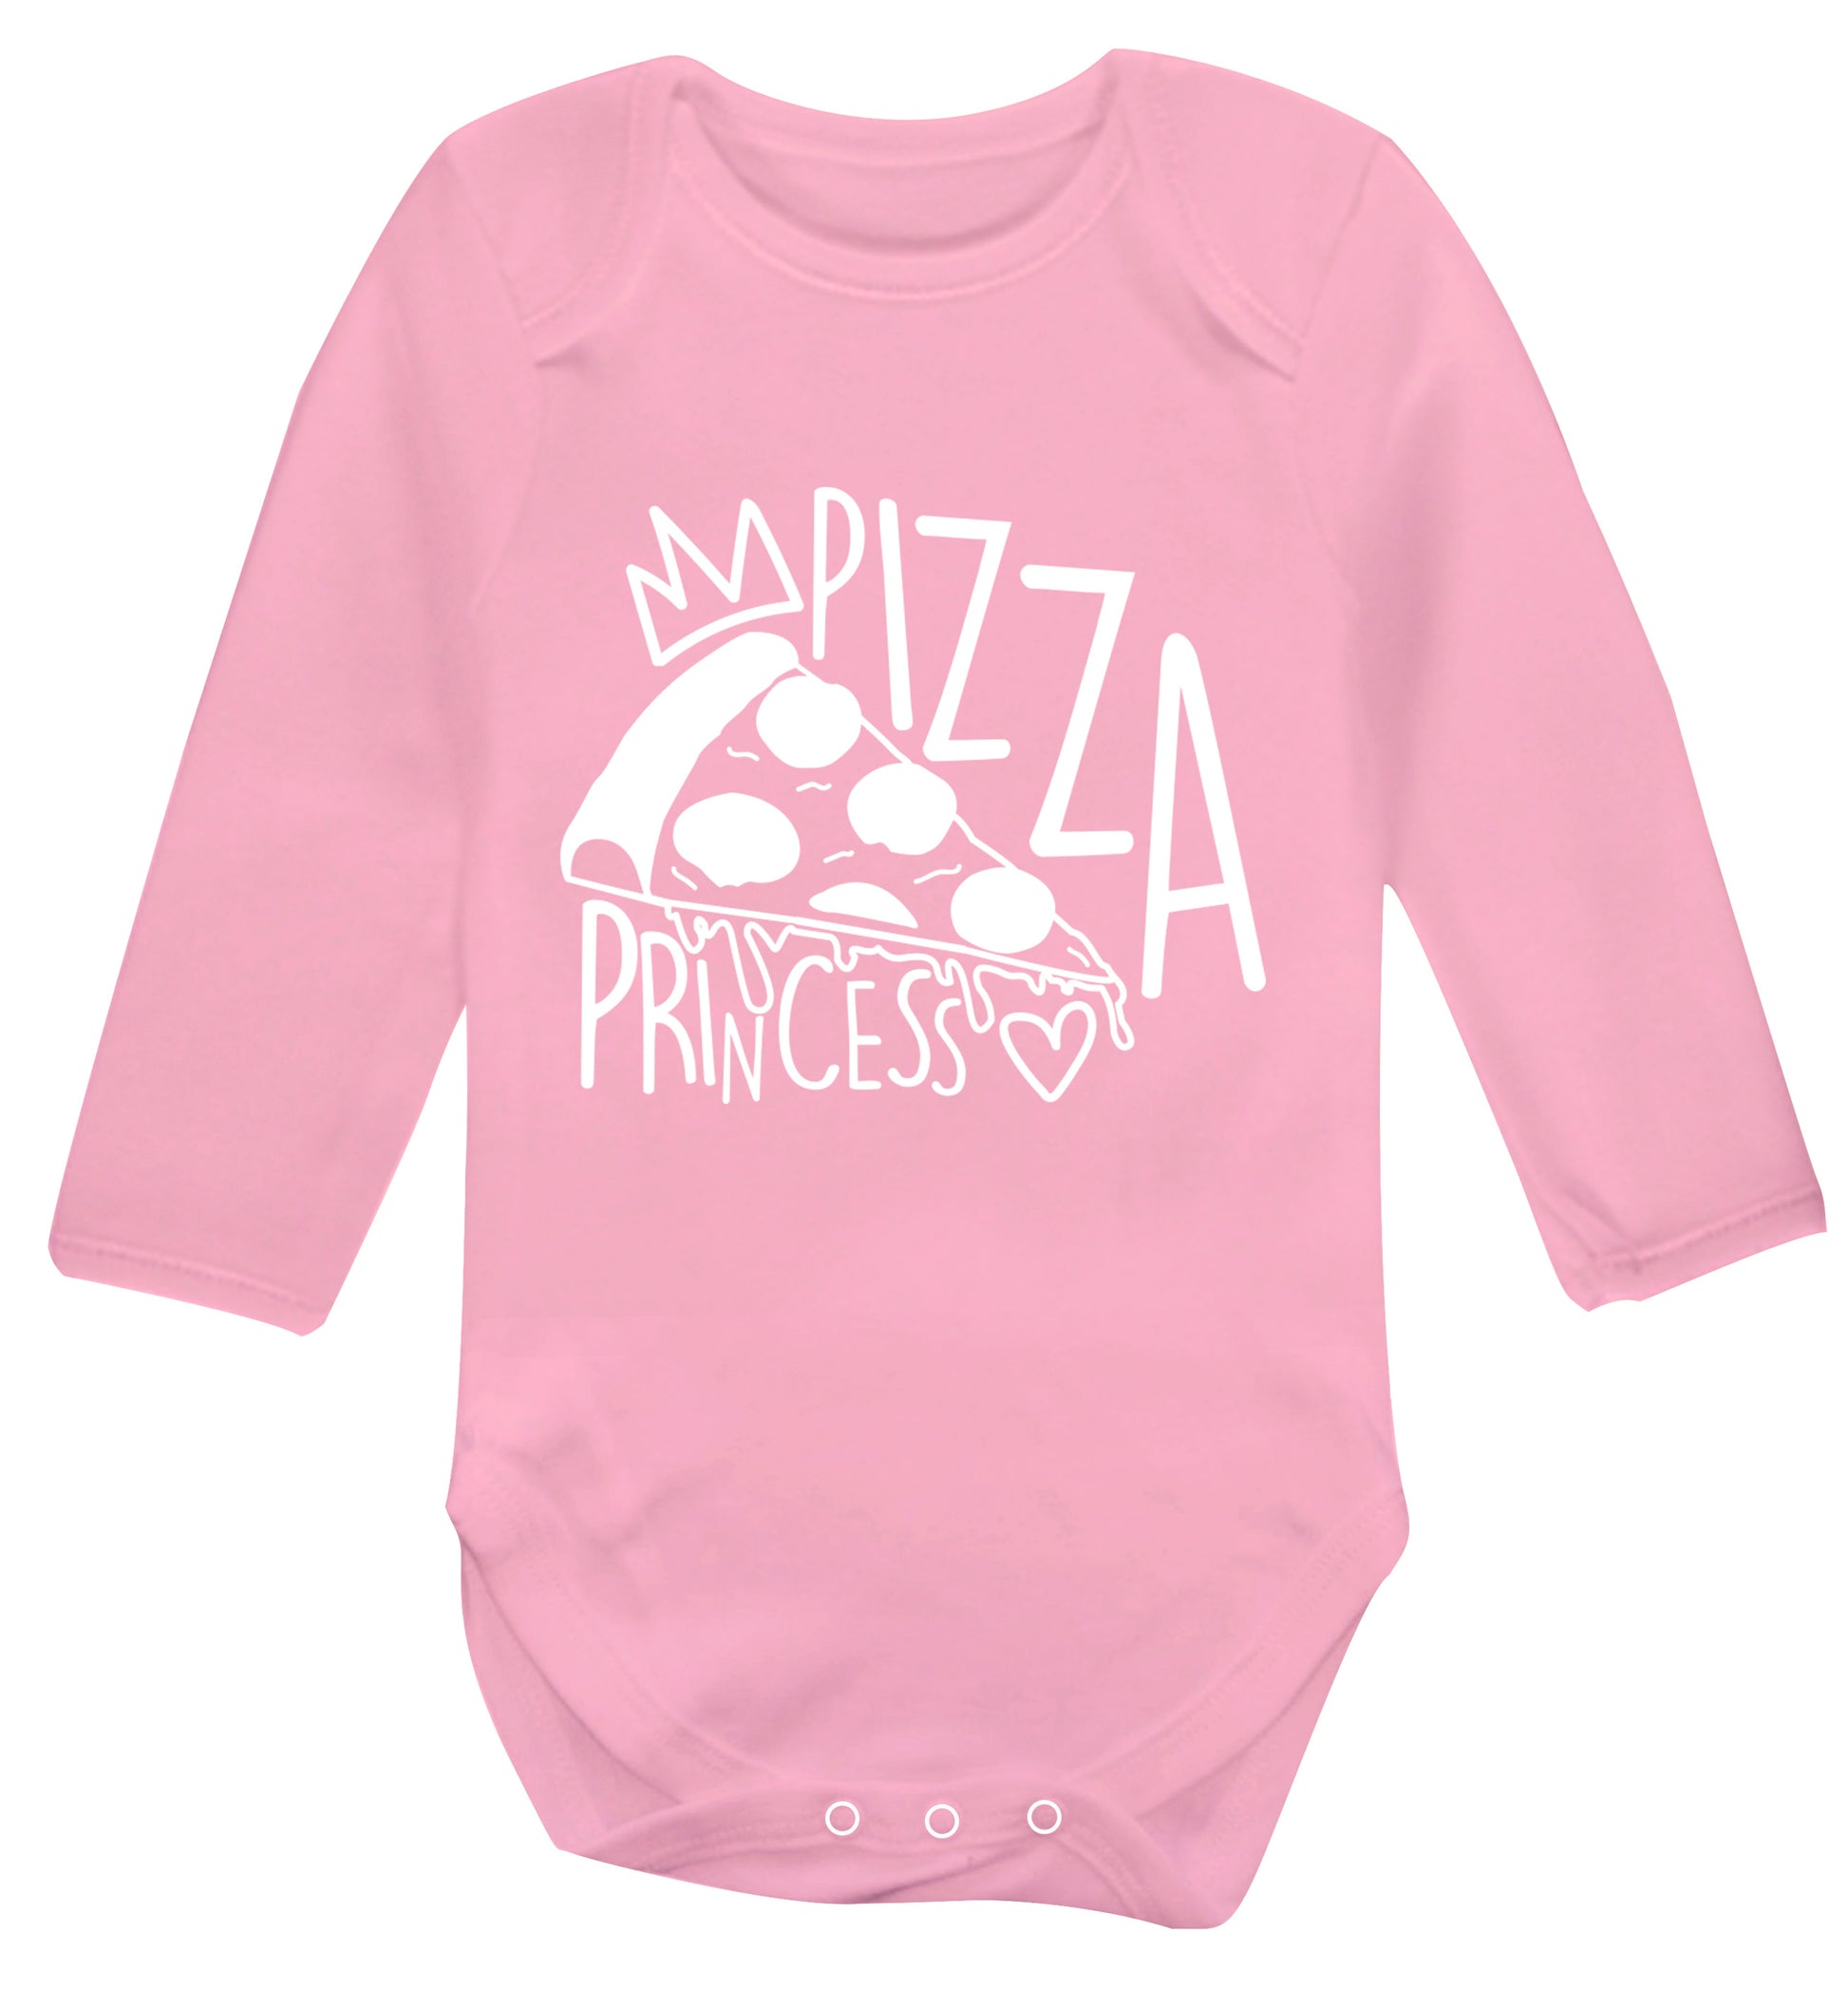 Pizza Princess Baby Vest long sleeved pale pink 6-12 months